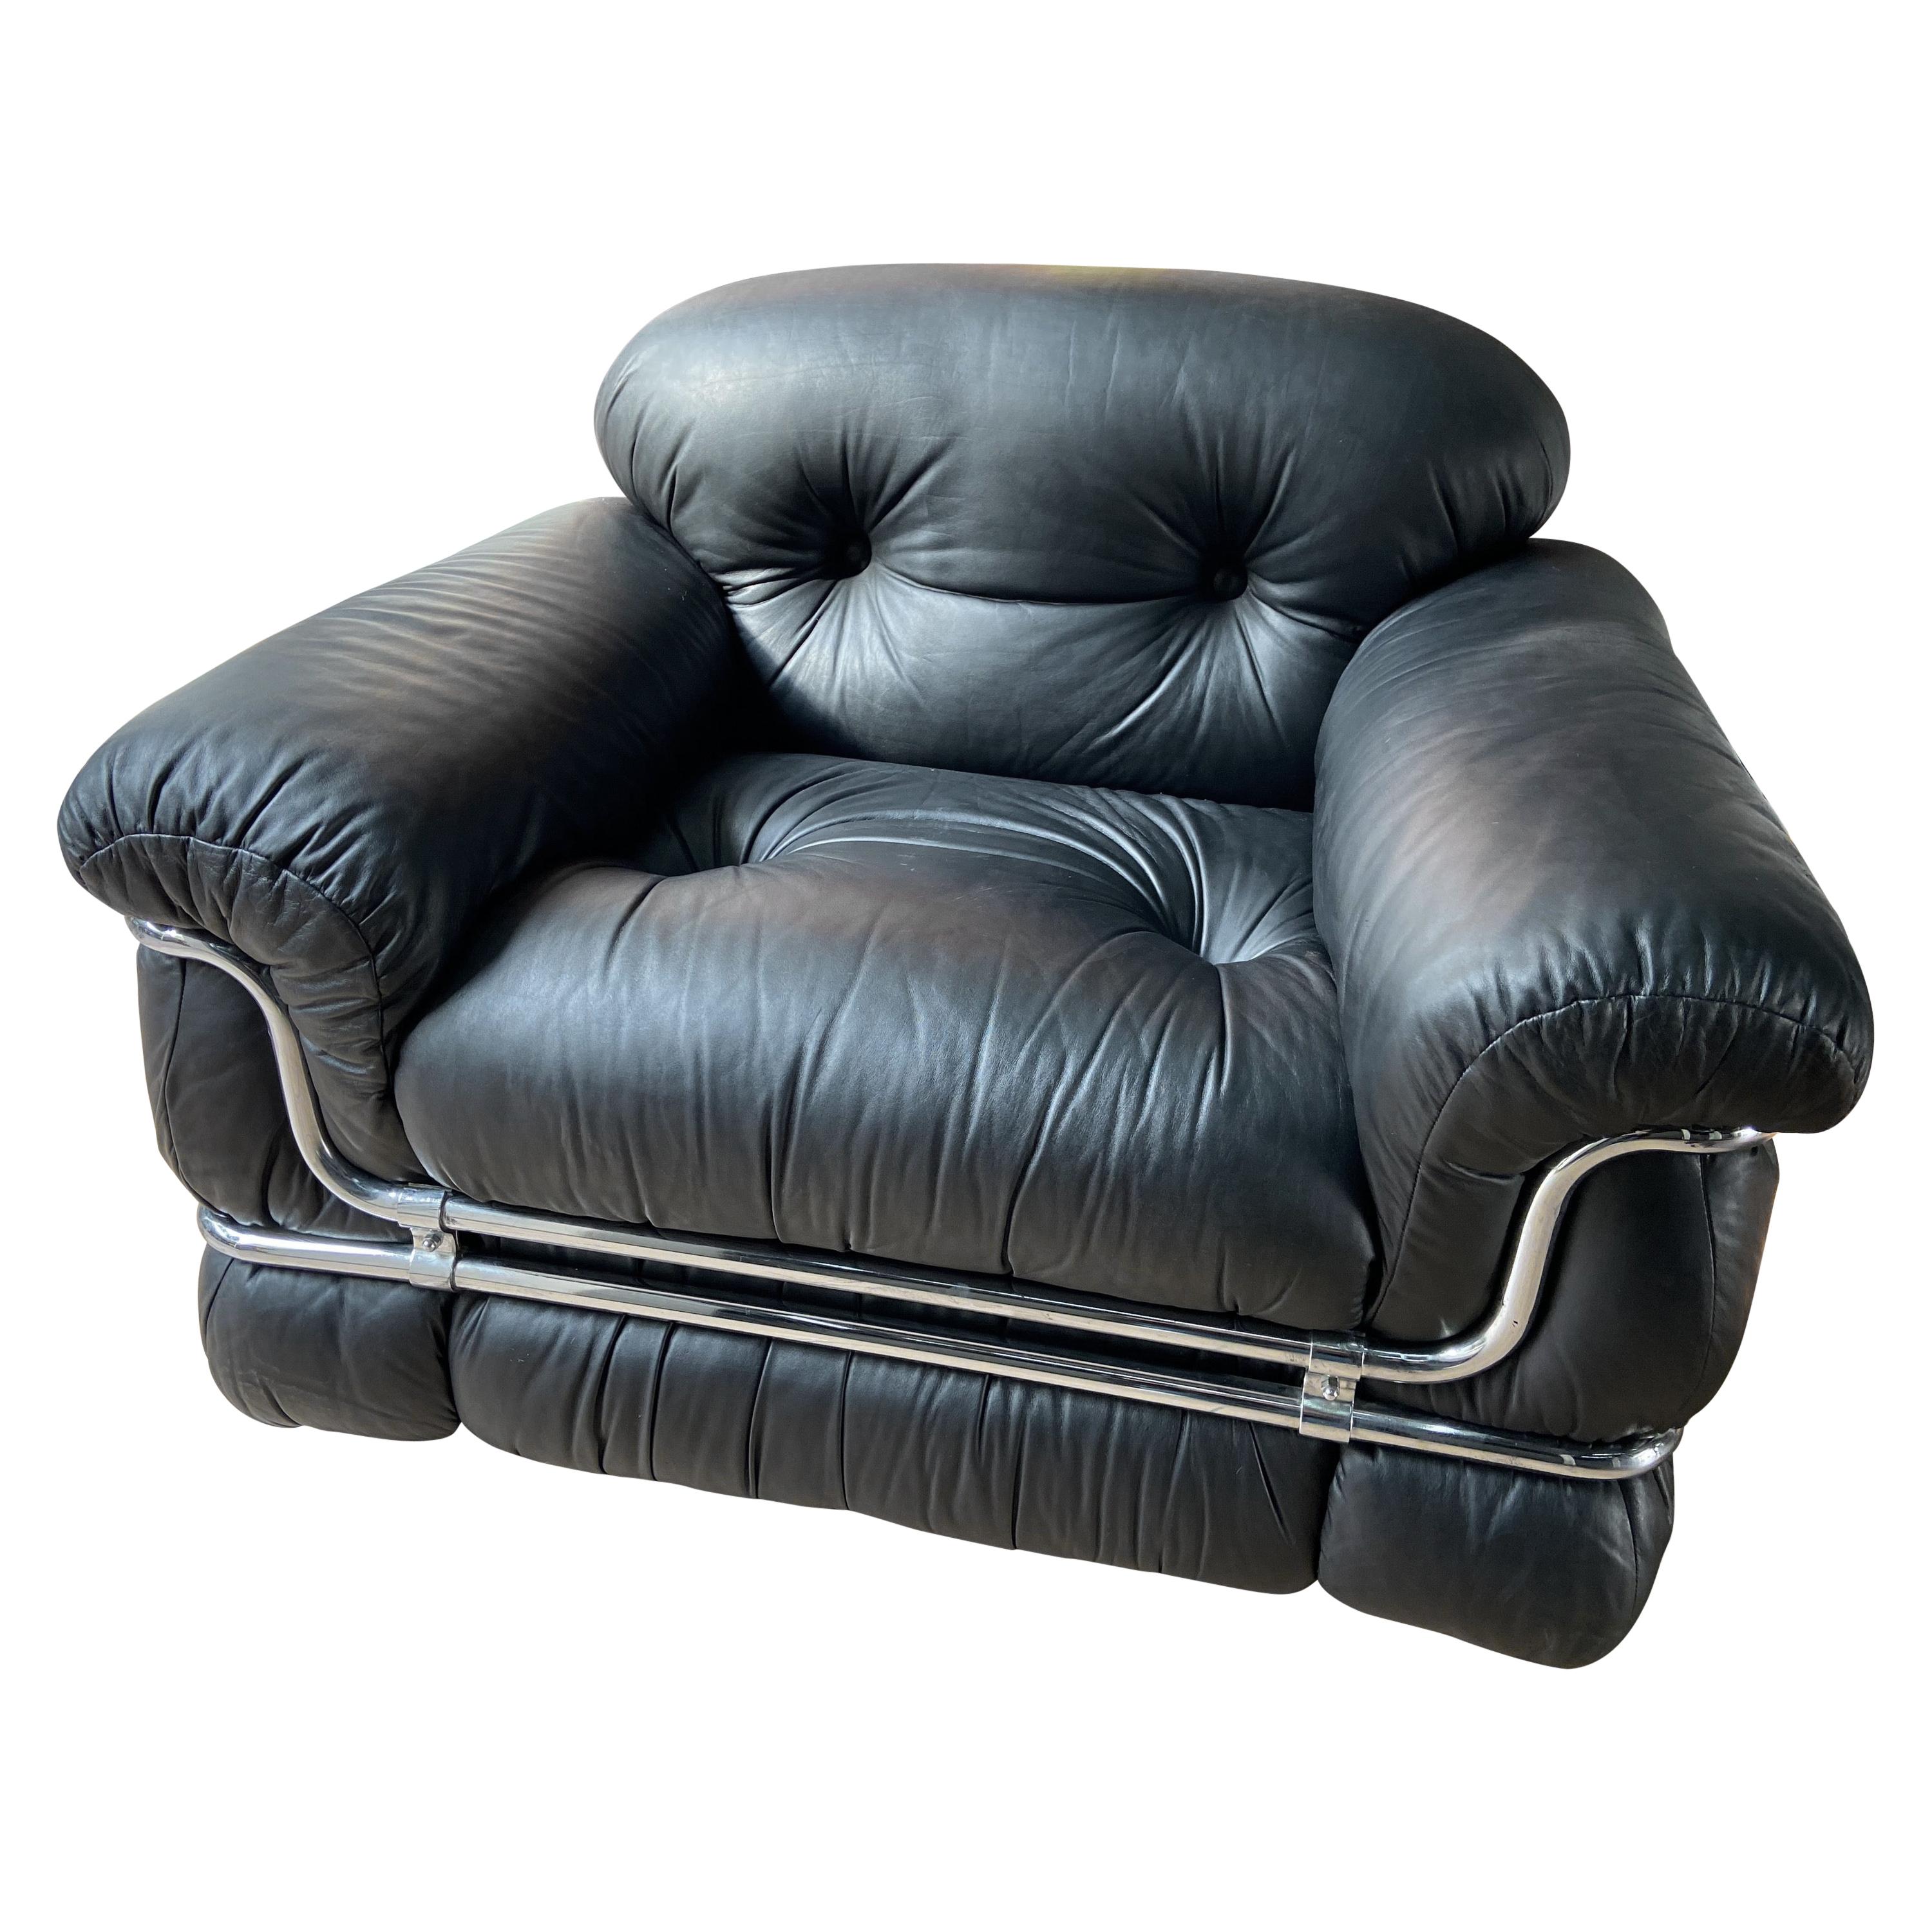 Adriano Piazzesi, Black Leather Armchair, 1976